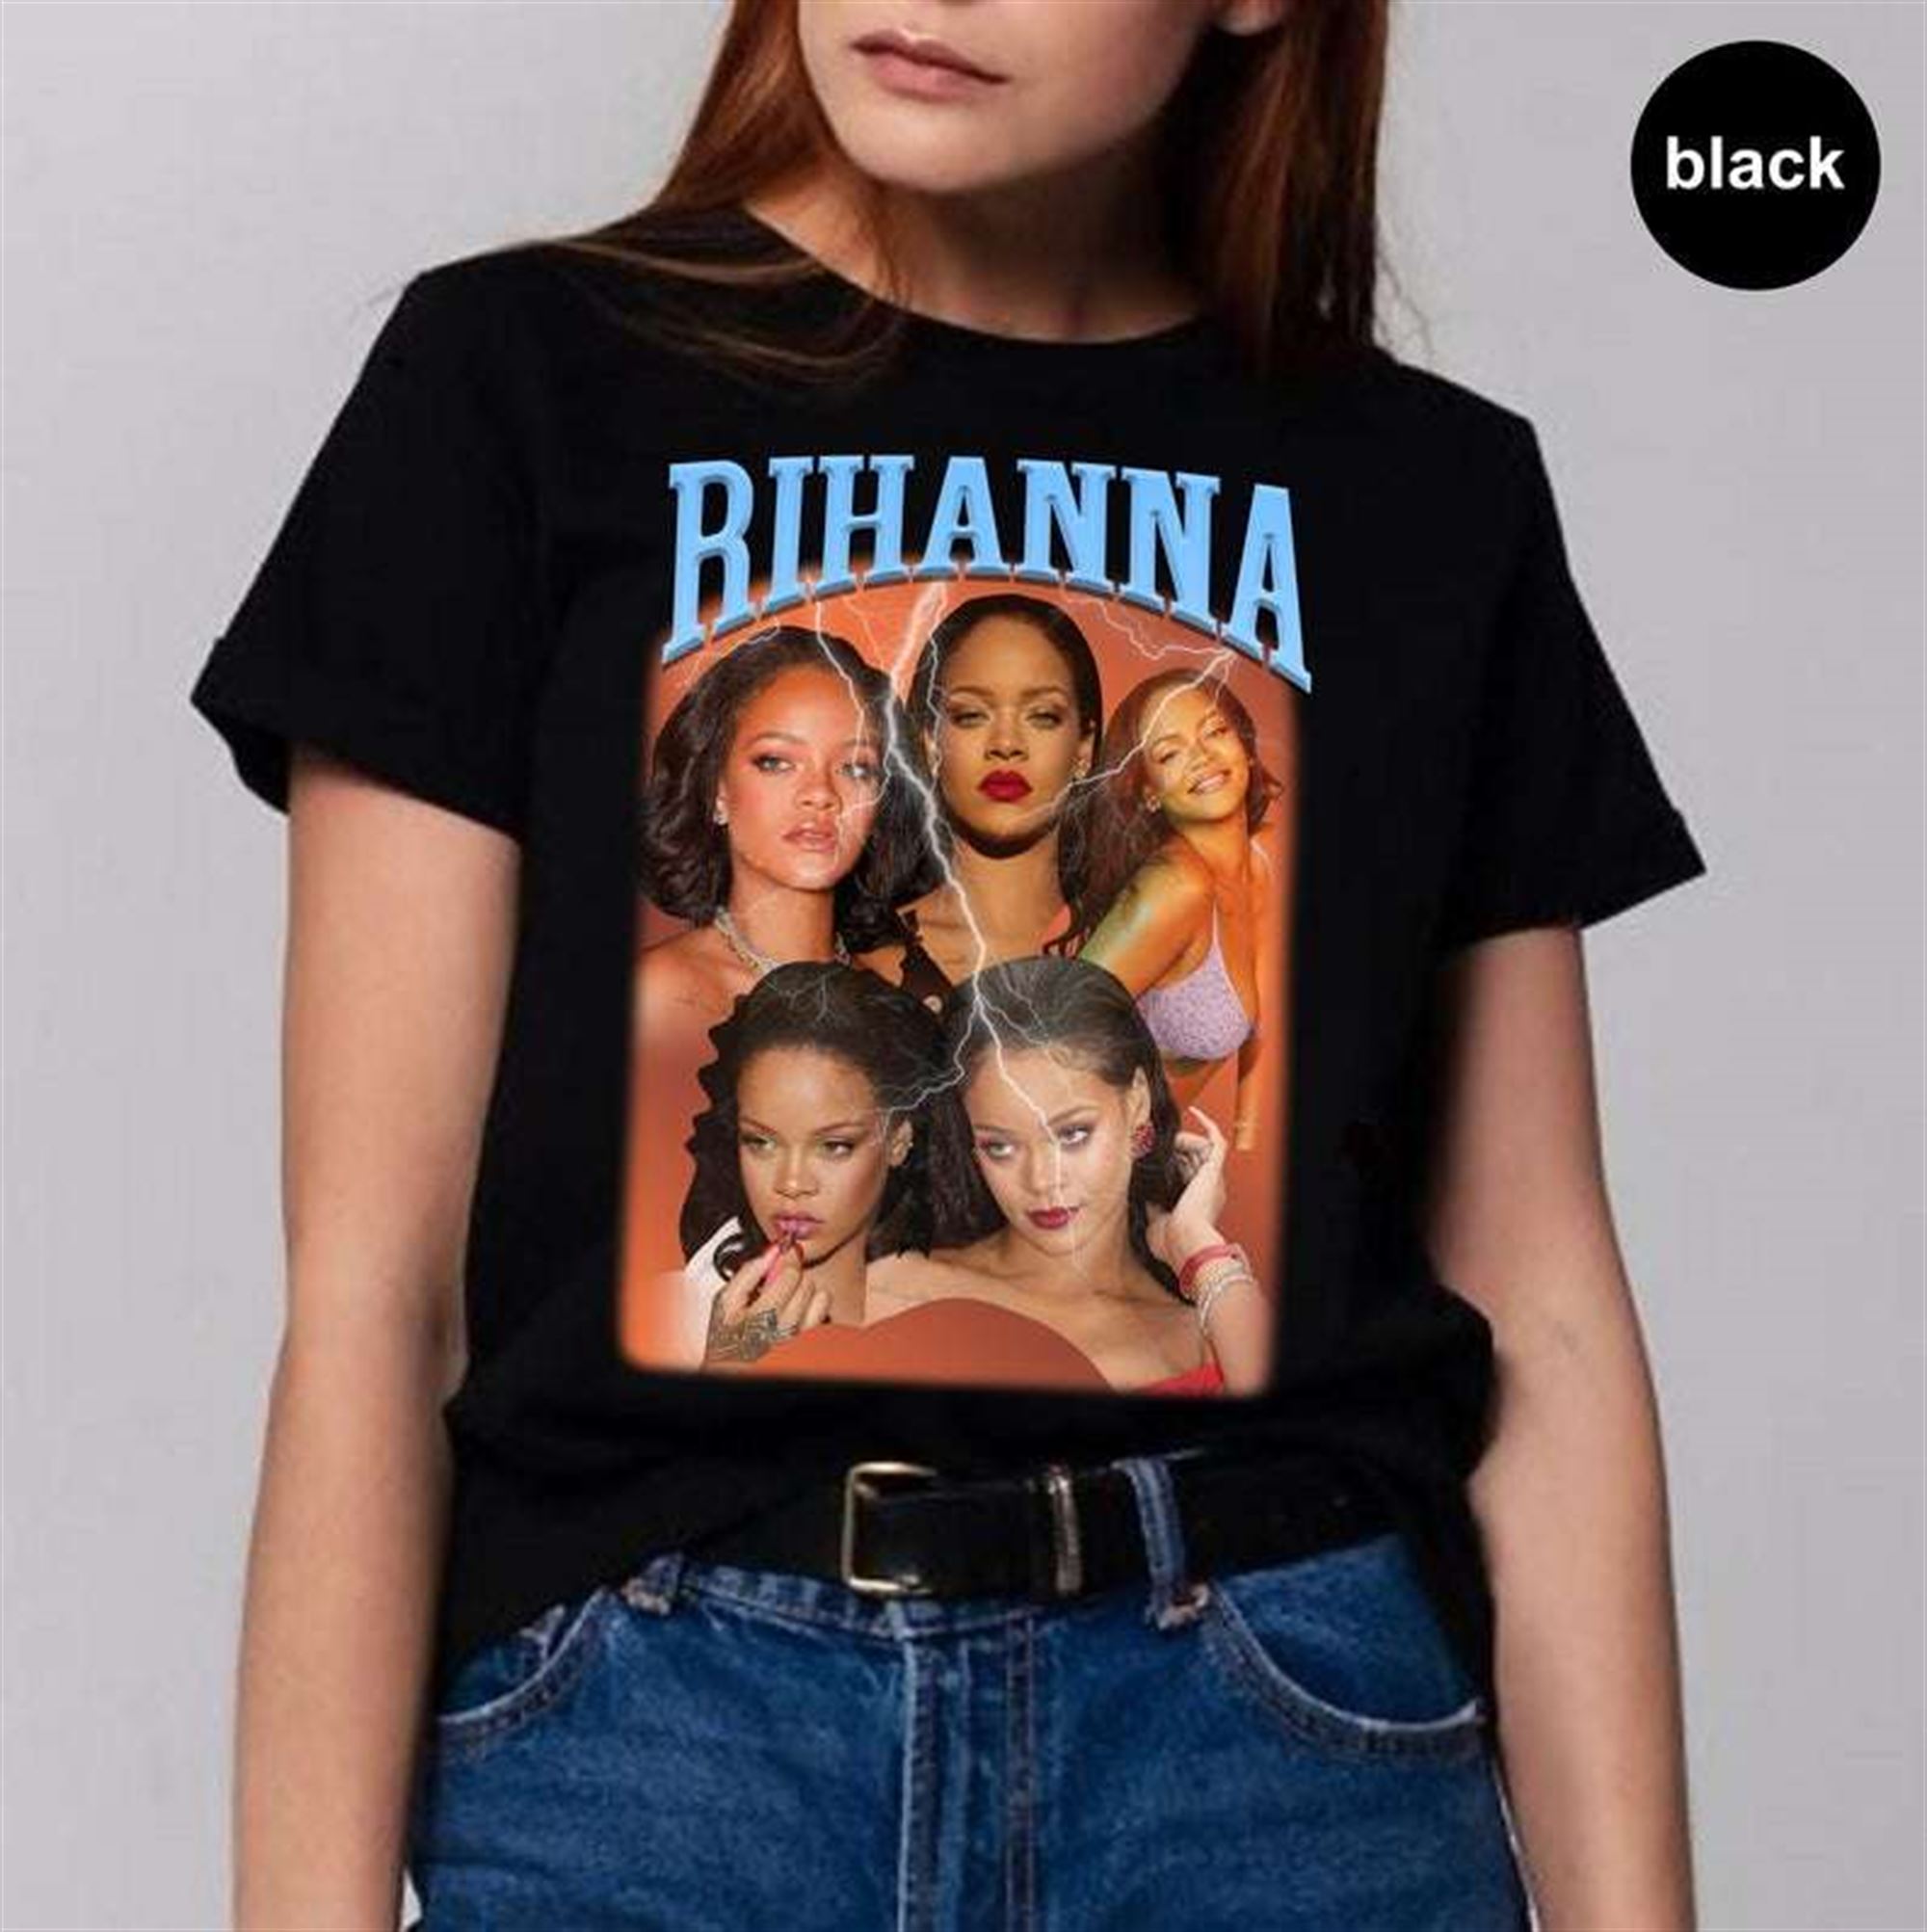 Rihanna Vintage Classic T Shirt Size Up To 5xl